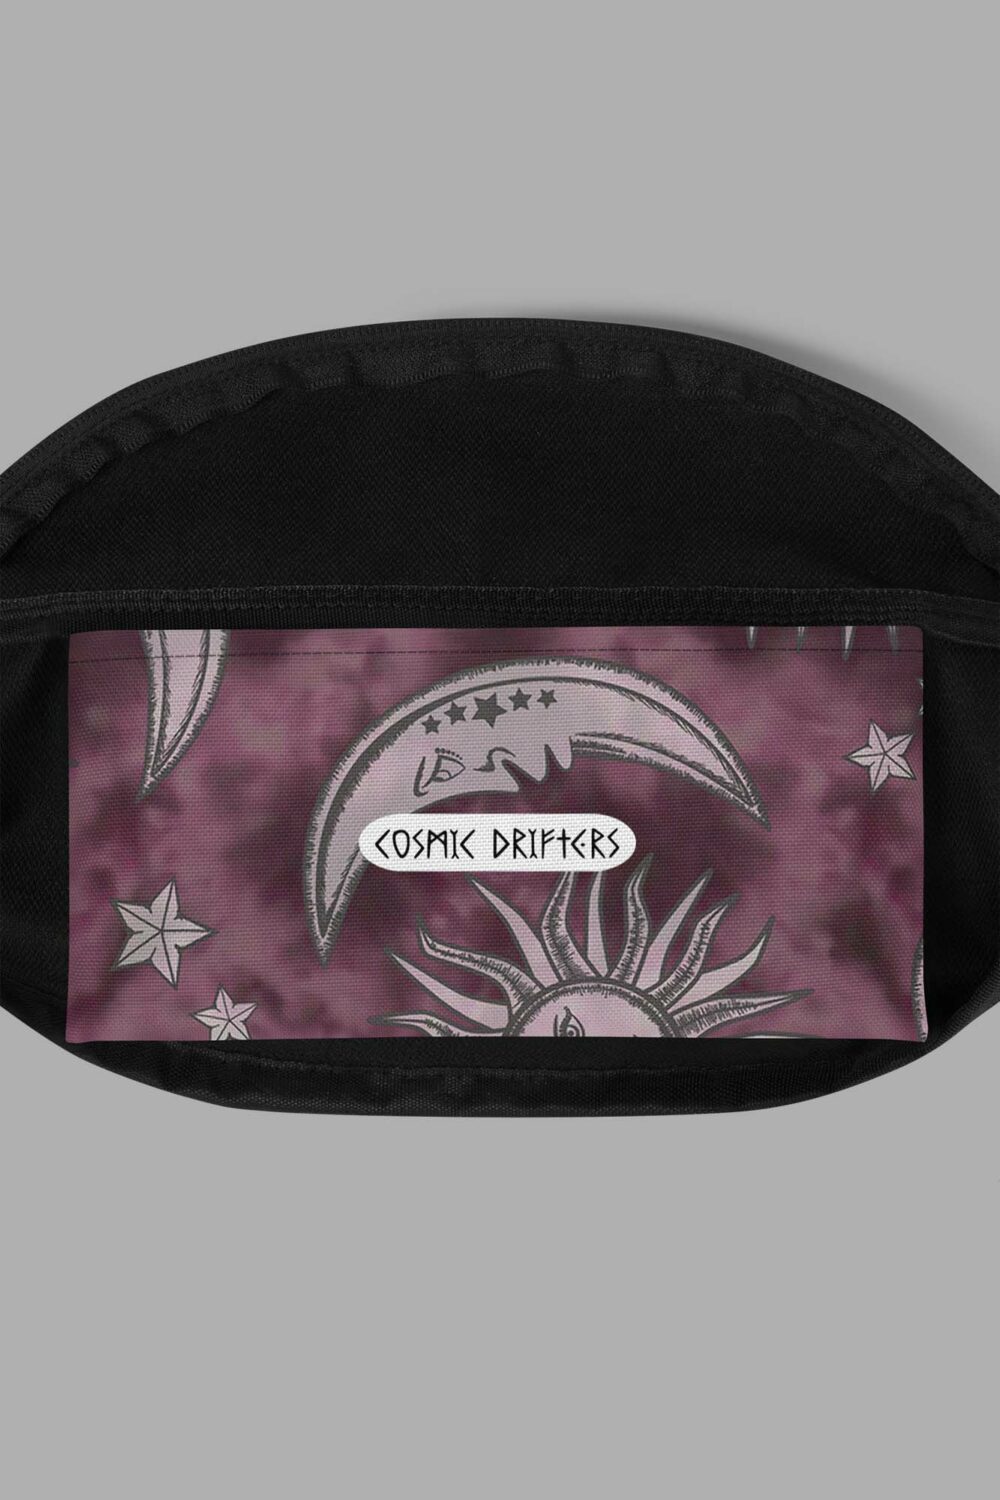 cosmic drifters pink suns moons print fanny pack pocket